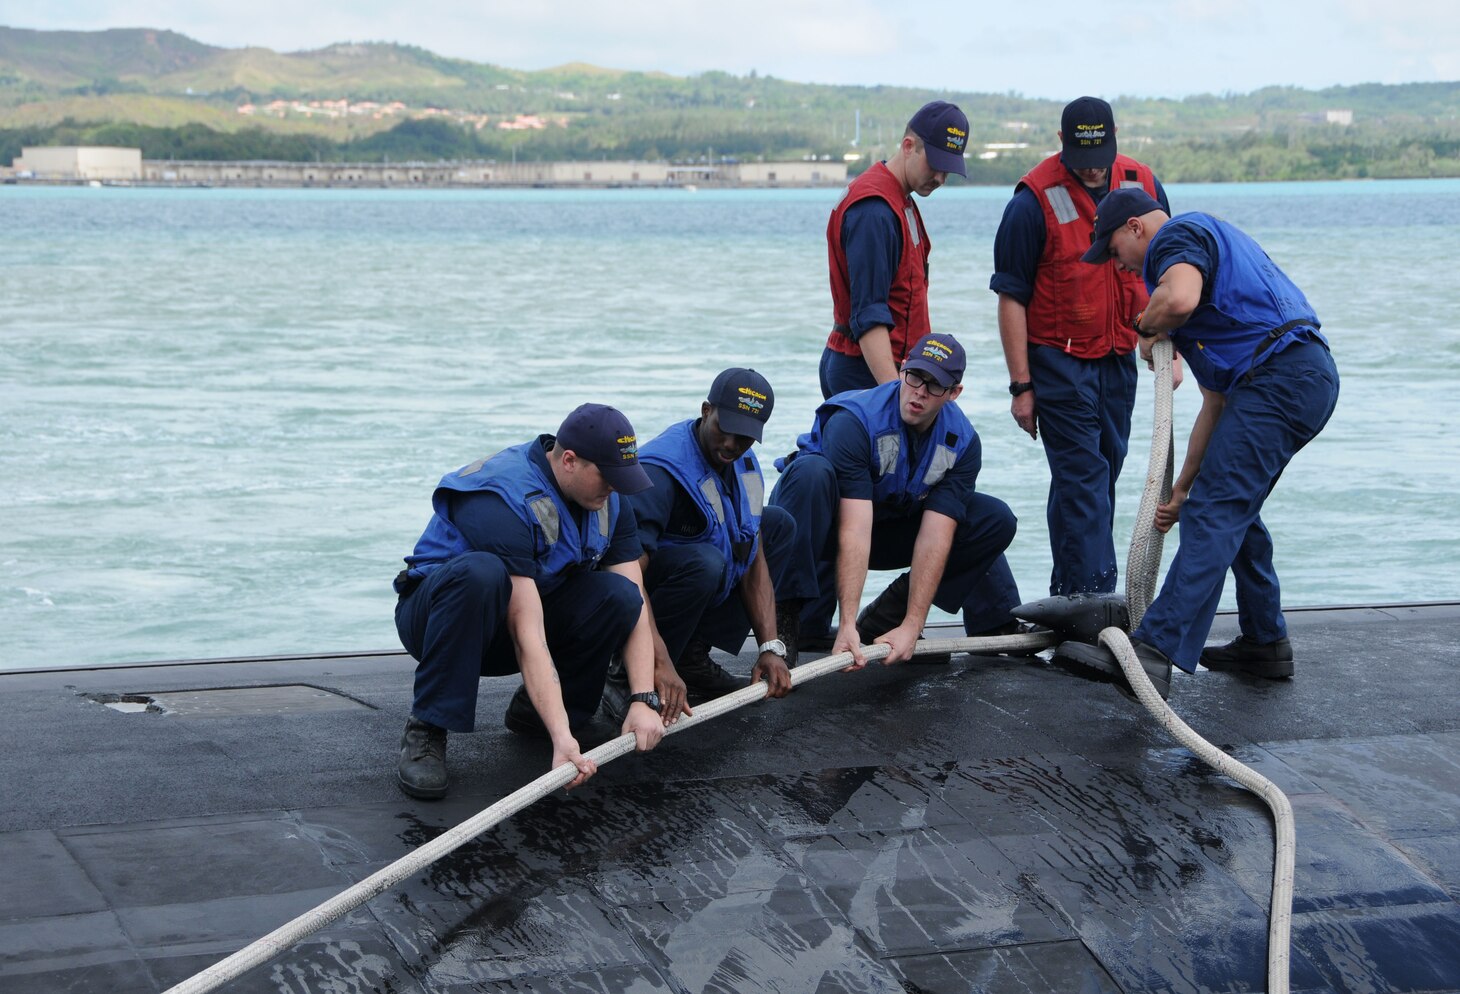 130425-N-LS794-133 APRA HARBOR, Guam (April 25, 2013) – Sailors aboard the Los Angeles-class fast attack submarine USS Chicago (SSN 721) secure mooring lines in Apra Harbor as Chicago returns from their first mission attached to Commander, Submarine Squadron FIFTEEN.  Chicago was out to sea for seven weeks conducting operations in the 7th Fleet area of responsibility.  (U.S. Navy photo by Mass Communication Specialist 1st Class Jeffrey Jay Price/Released)